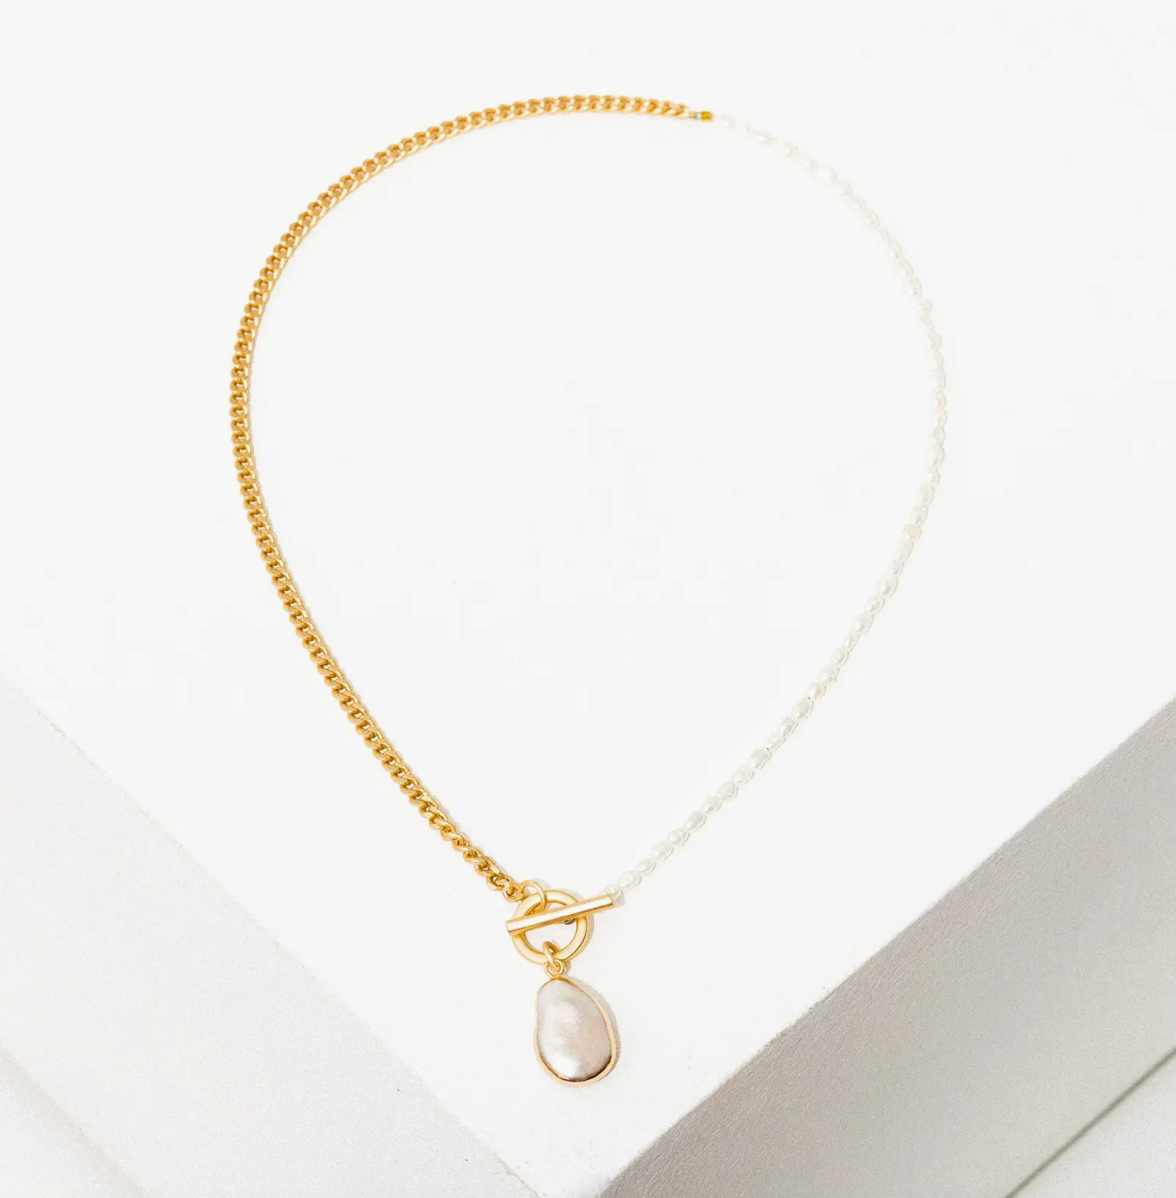 The Freshwater Pearl Necklace